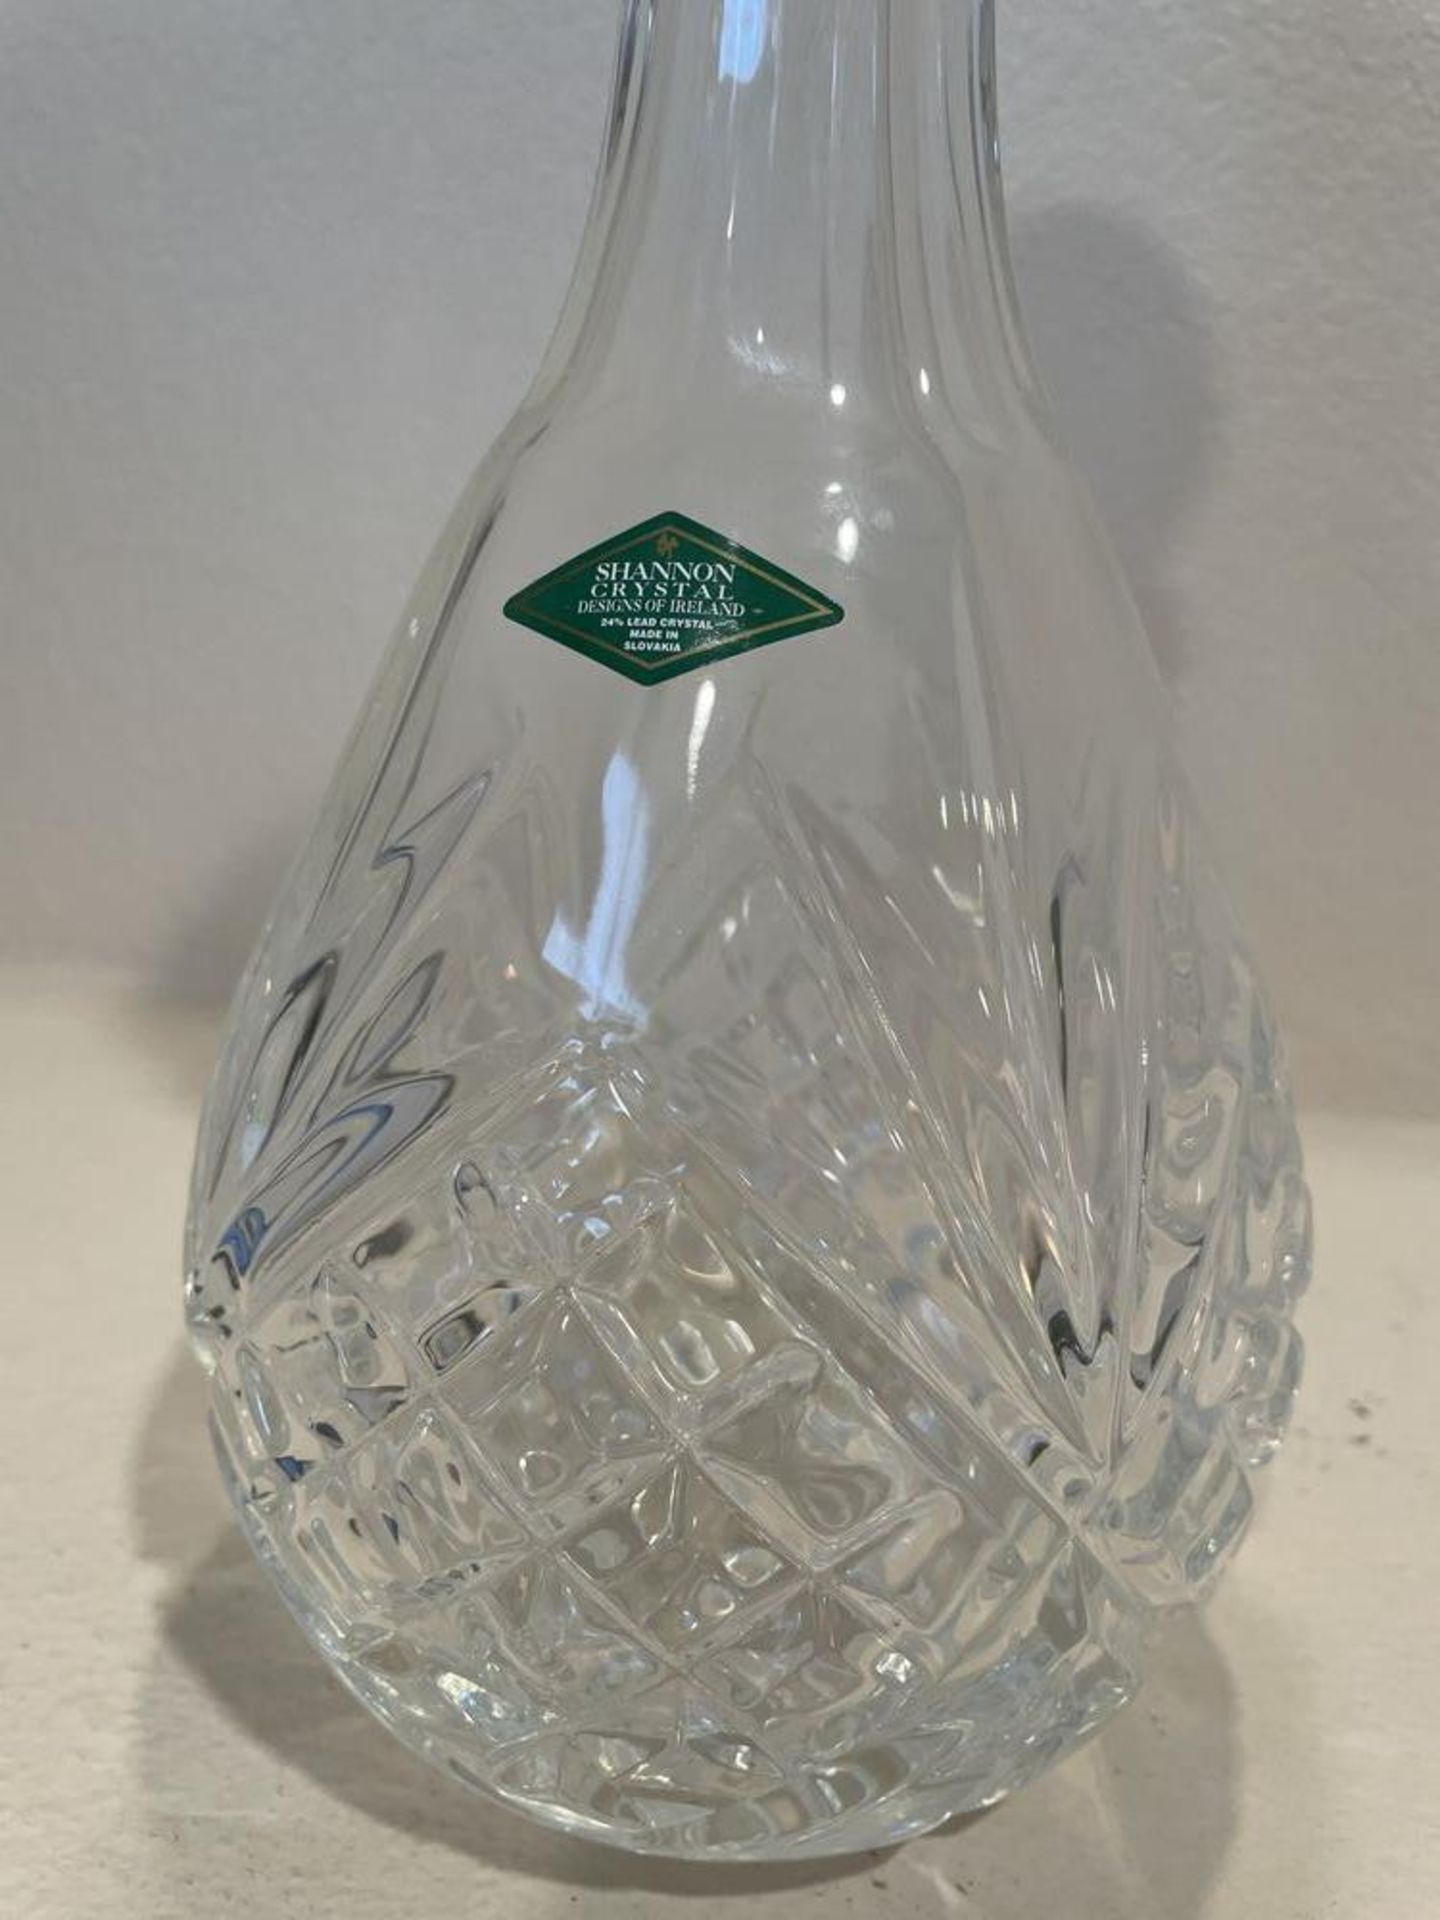 Shannon Crystal Wine Carafe with Lid, Made in Slovakia - 13 x 5" - Image 3 of 8